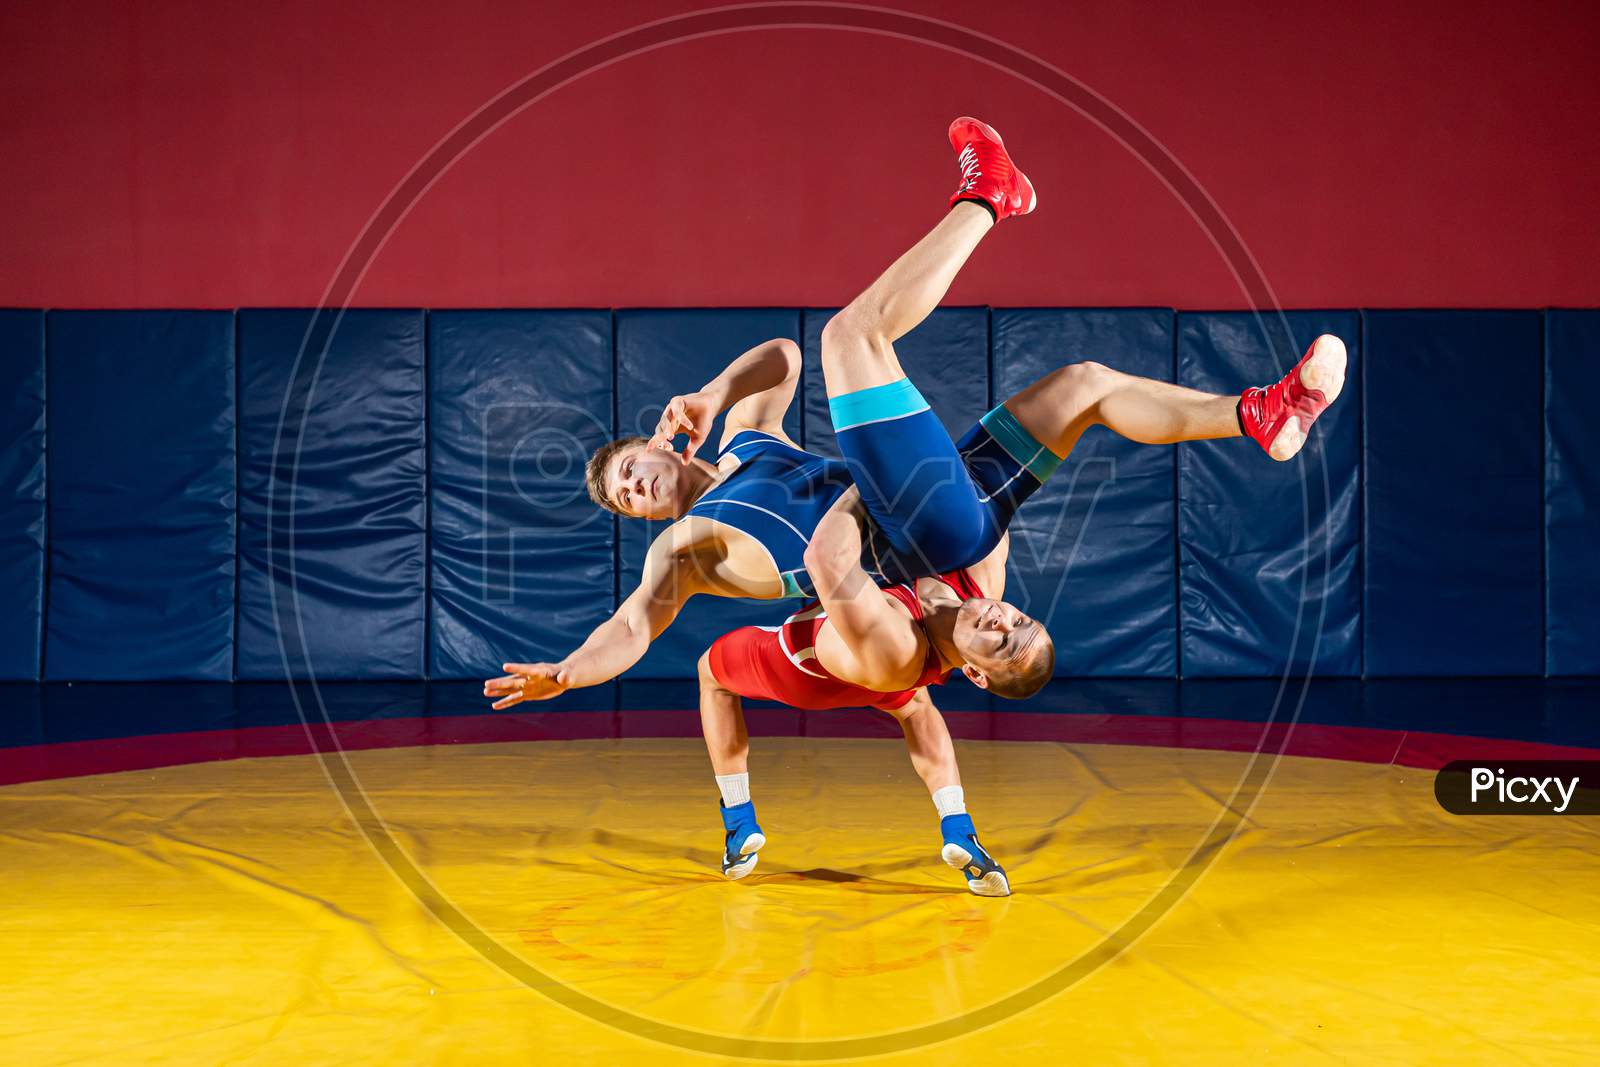 Two Greco-Roman  Wrestlers In Red And Blue Uniform Wrestling  On A Yellow Wrestling Carpet In The Gym